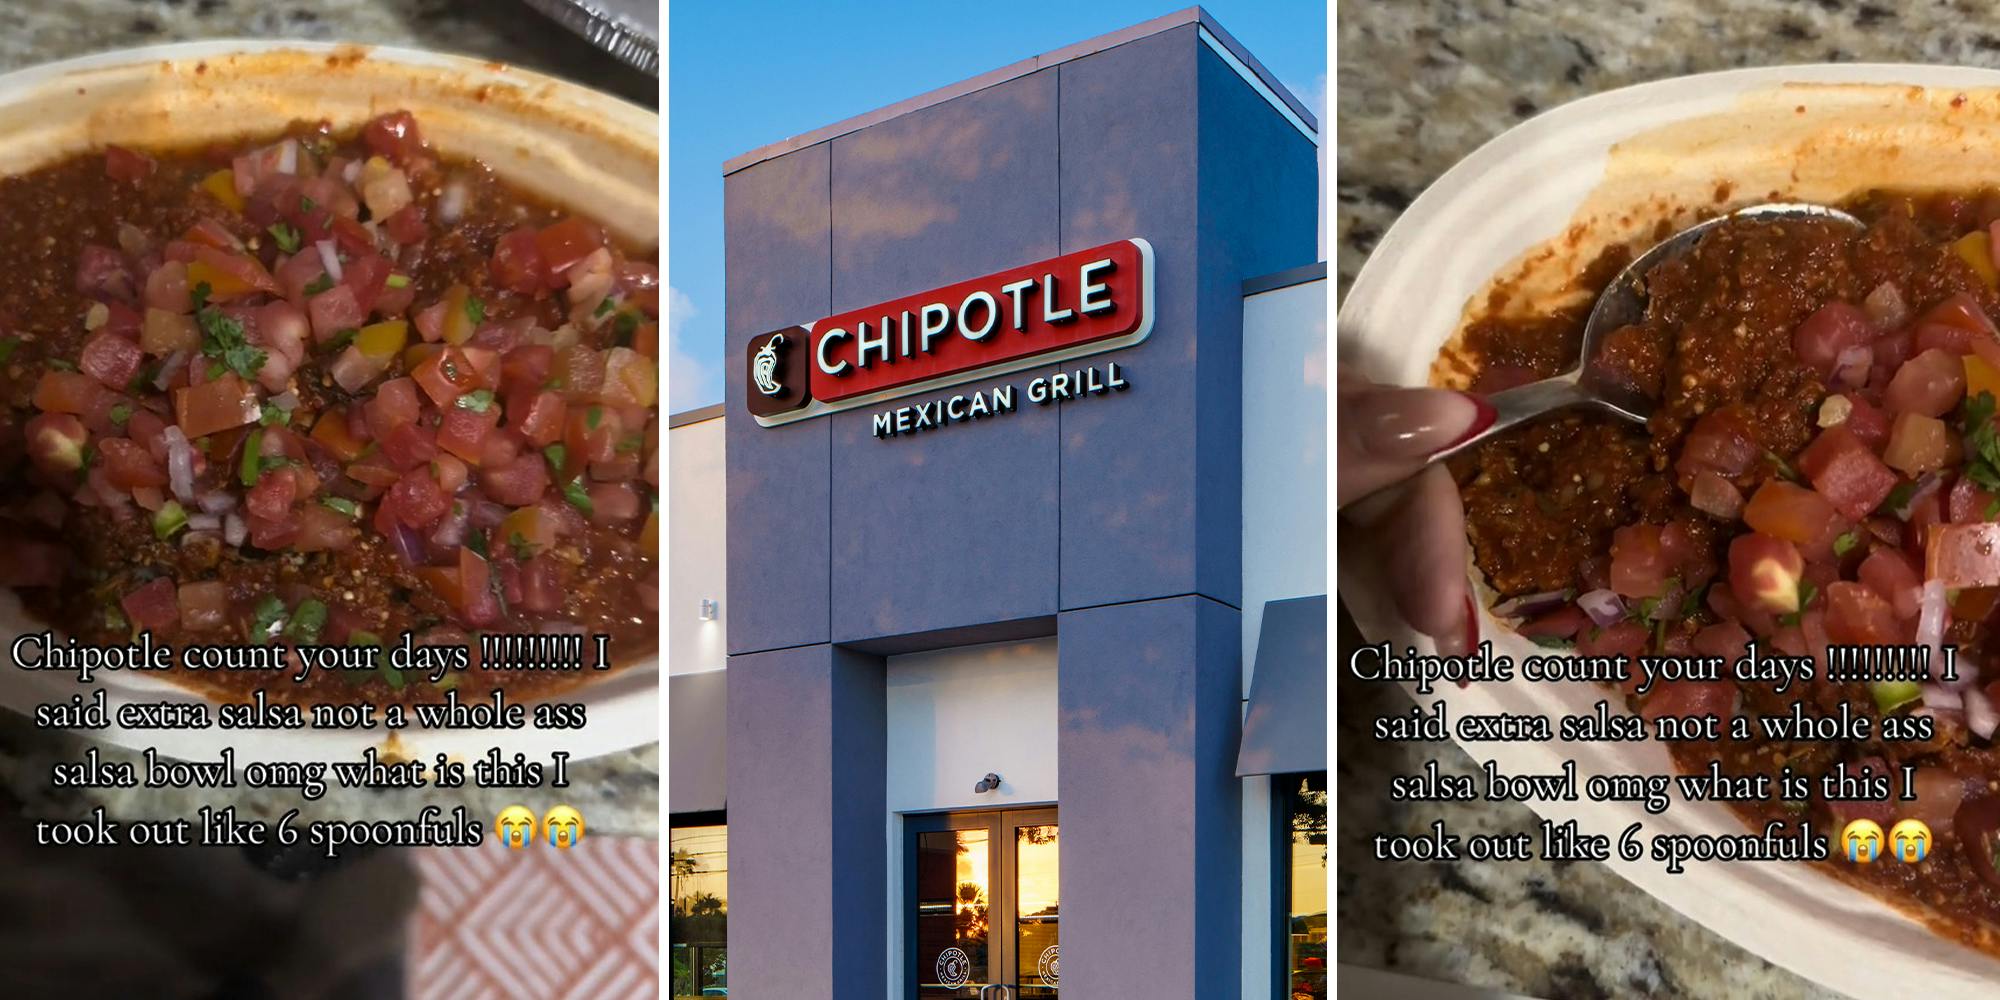 ‘Where is this generosity with the MEATTT’: Chipotle customer asks for extra salsa, gets bamboozled